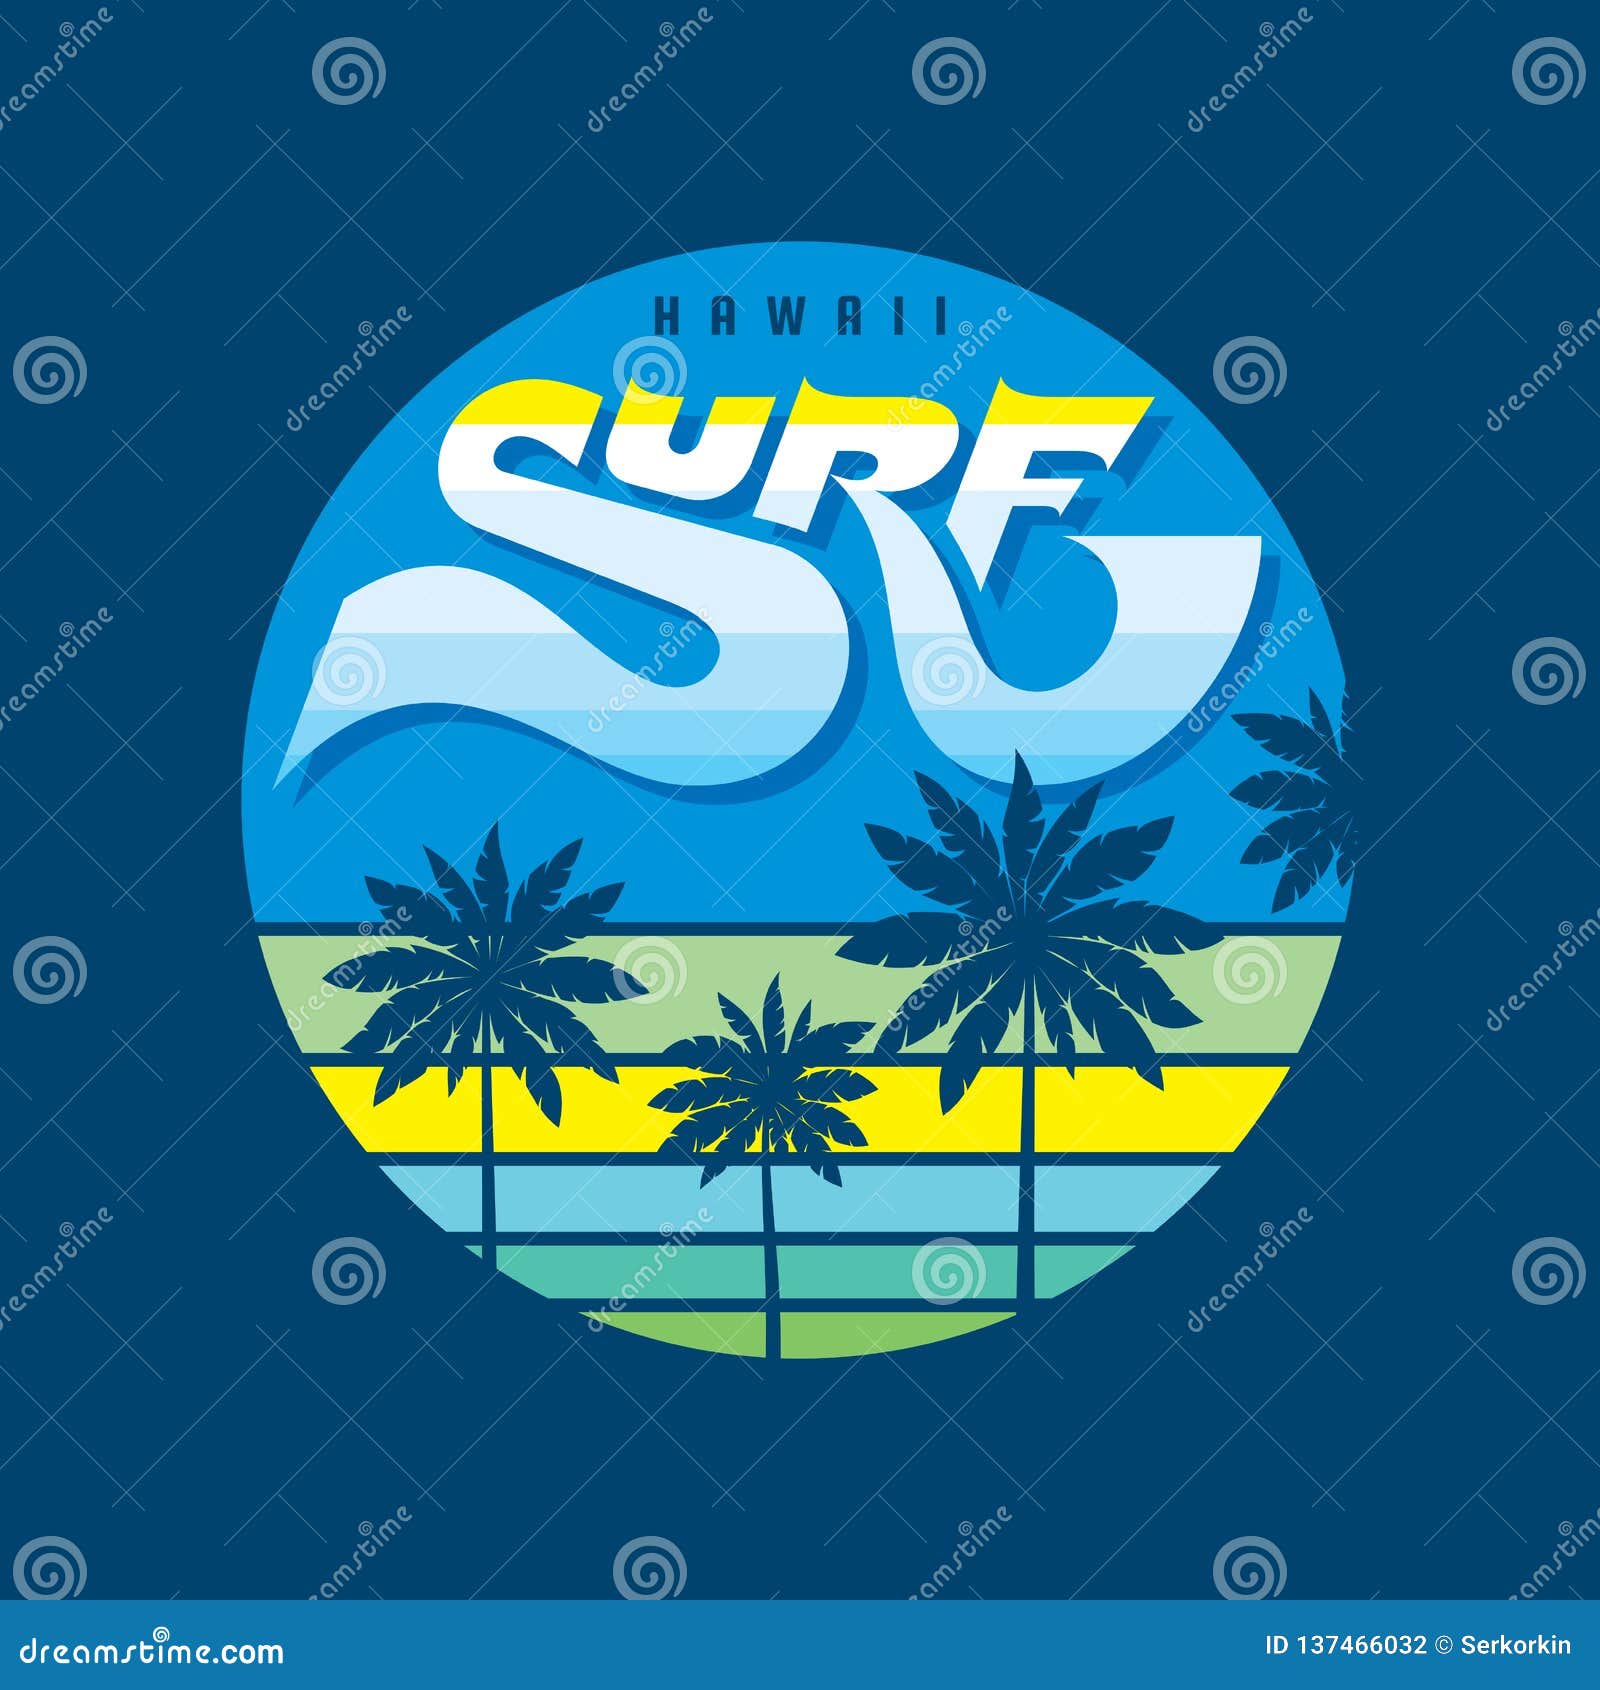 Prism Sticker Island Paradise Sunset vintage Surfing 1980's BLUE 3x4in Details about   HAWAII 